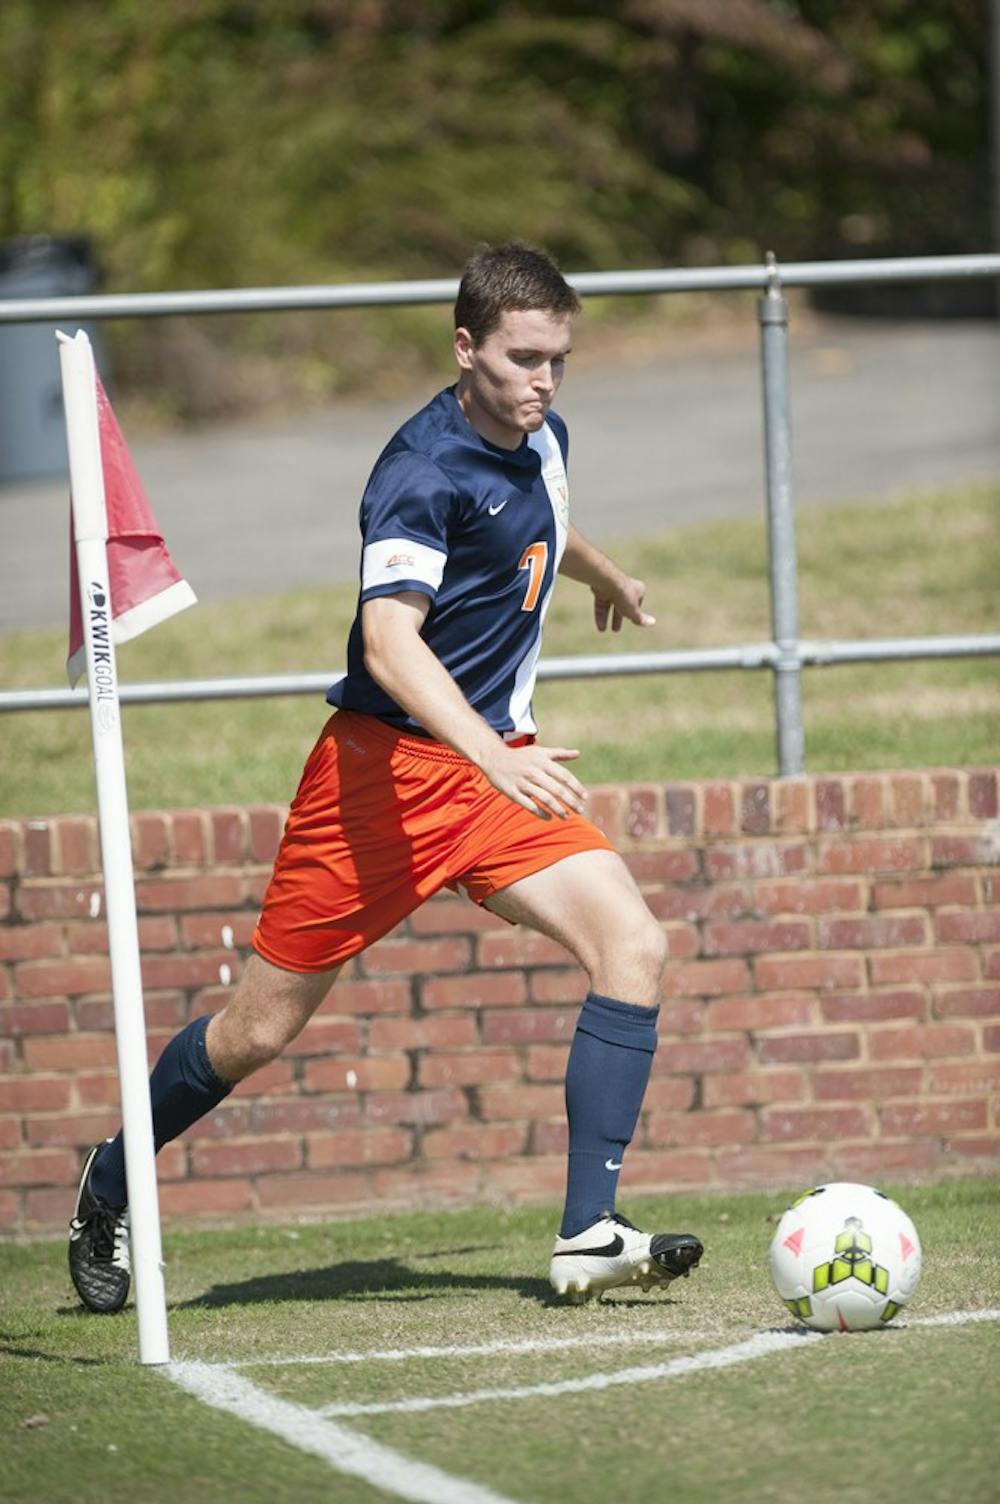 <p>The Virginia midfield looks strong this year, and junior Todd Wharton is a big reason why. It doesn't hurt that senior All-American Eric Bird and freshman Jake Rozhansky play alongside him. The trio has combined for three goals and five assists for the No. 14 Cavaliers, who battle Duke at home Saturday at 7 p.m.</p>